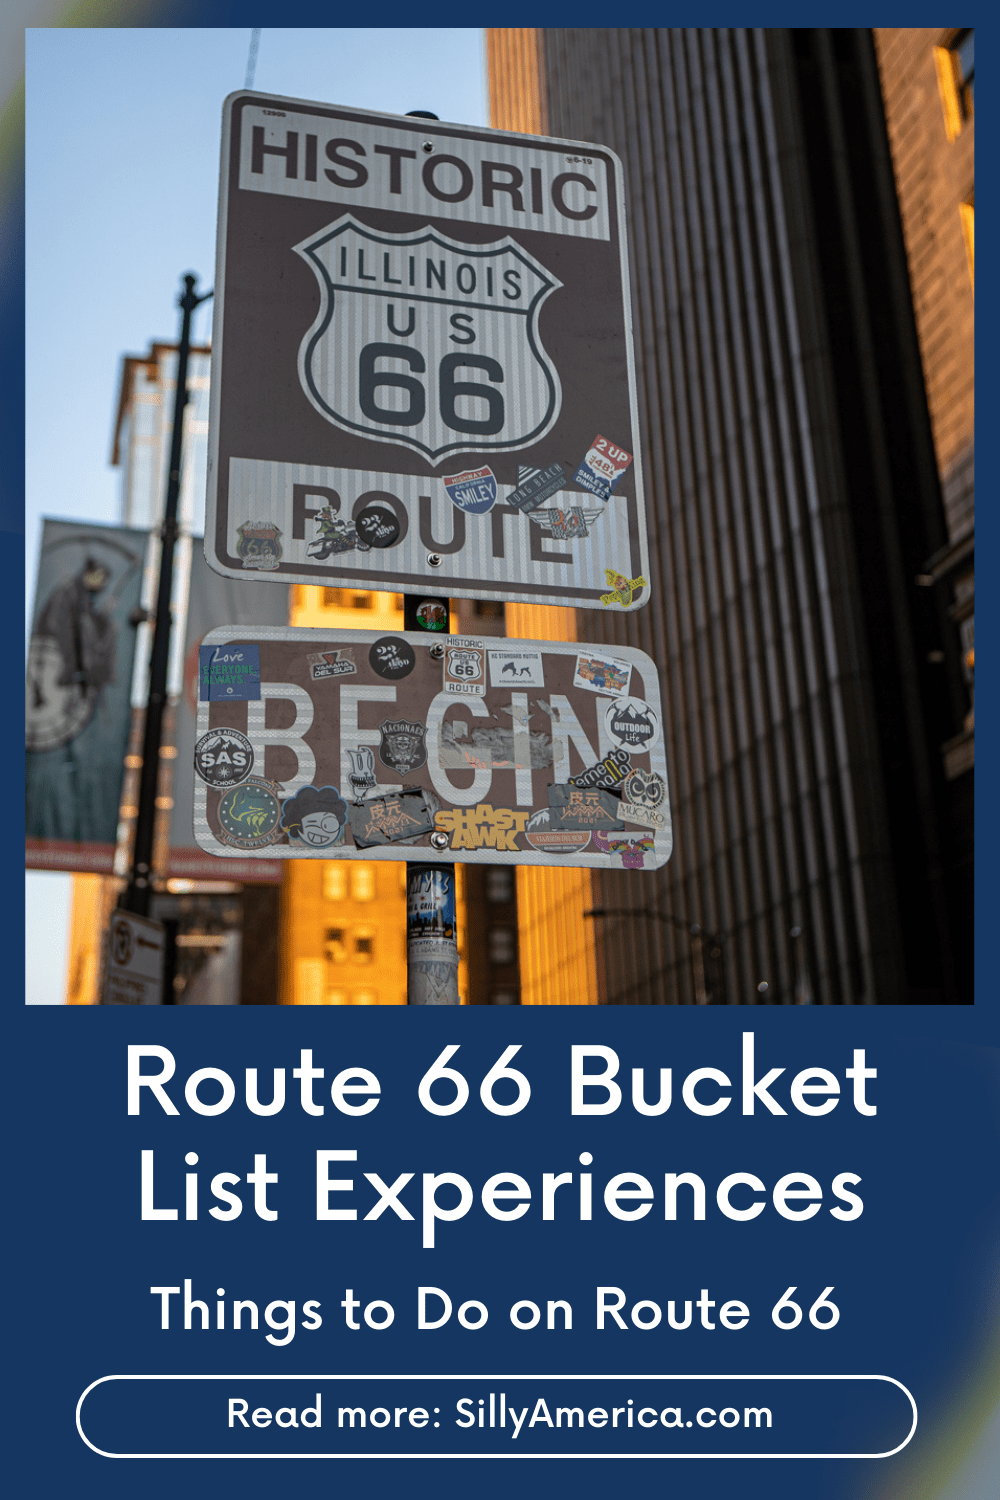 Route 66 runs nearly 2,500 miles across cover across eight states. At every turn you'll find a treasure trove of vintage motels, roadside attractions, natural wonders, iconic restaurants, and more. While driving Route 66 is a bucket list experience in itself, the journey is filled with Route 66 bucket list experiences and amazing things to do. If you're planning a Route 66 road trip, be sure to add this list of things to do on Route 66 to your travel itinerary and Route 66 bucket list. #Route66